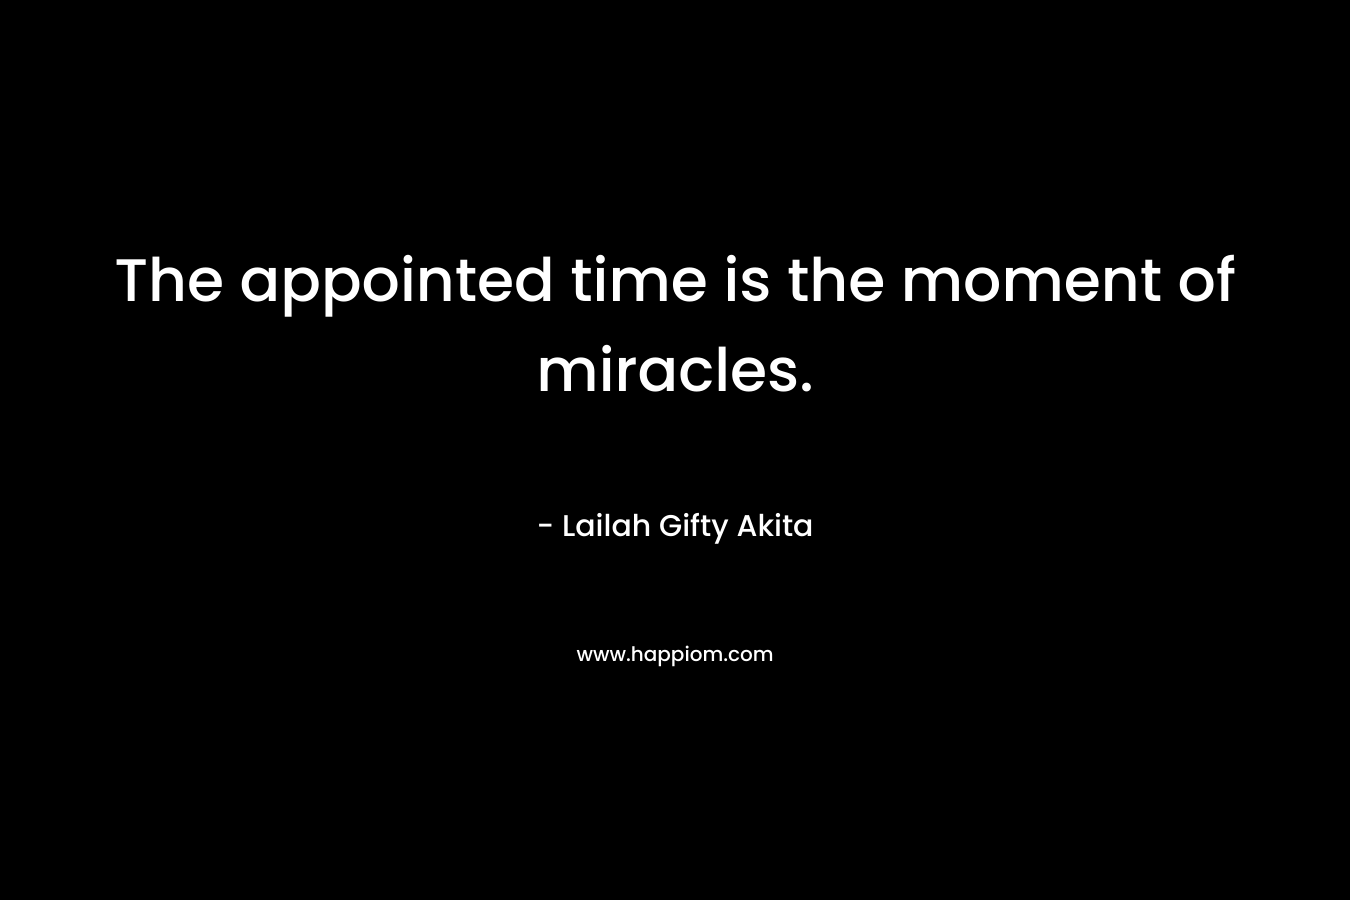 The appointed time is the moment of miracles.